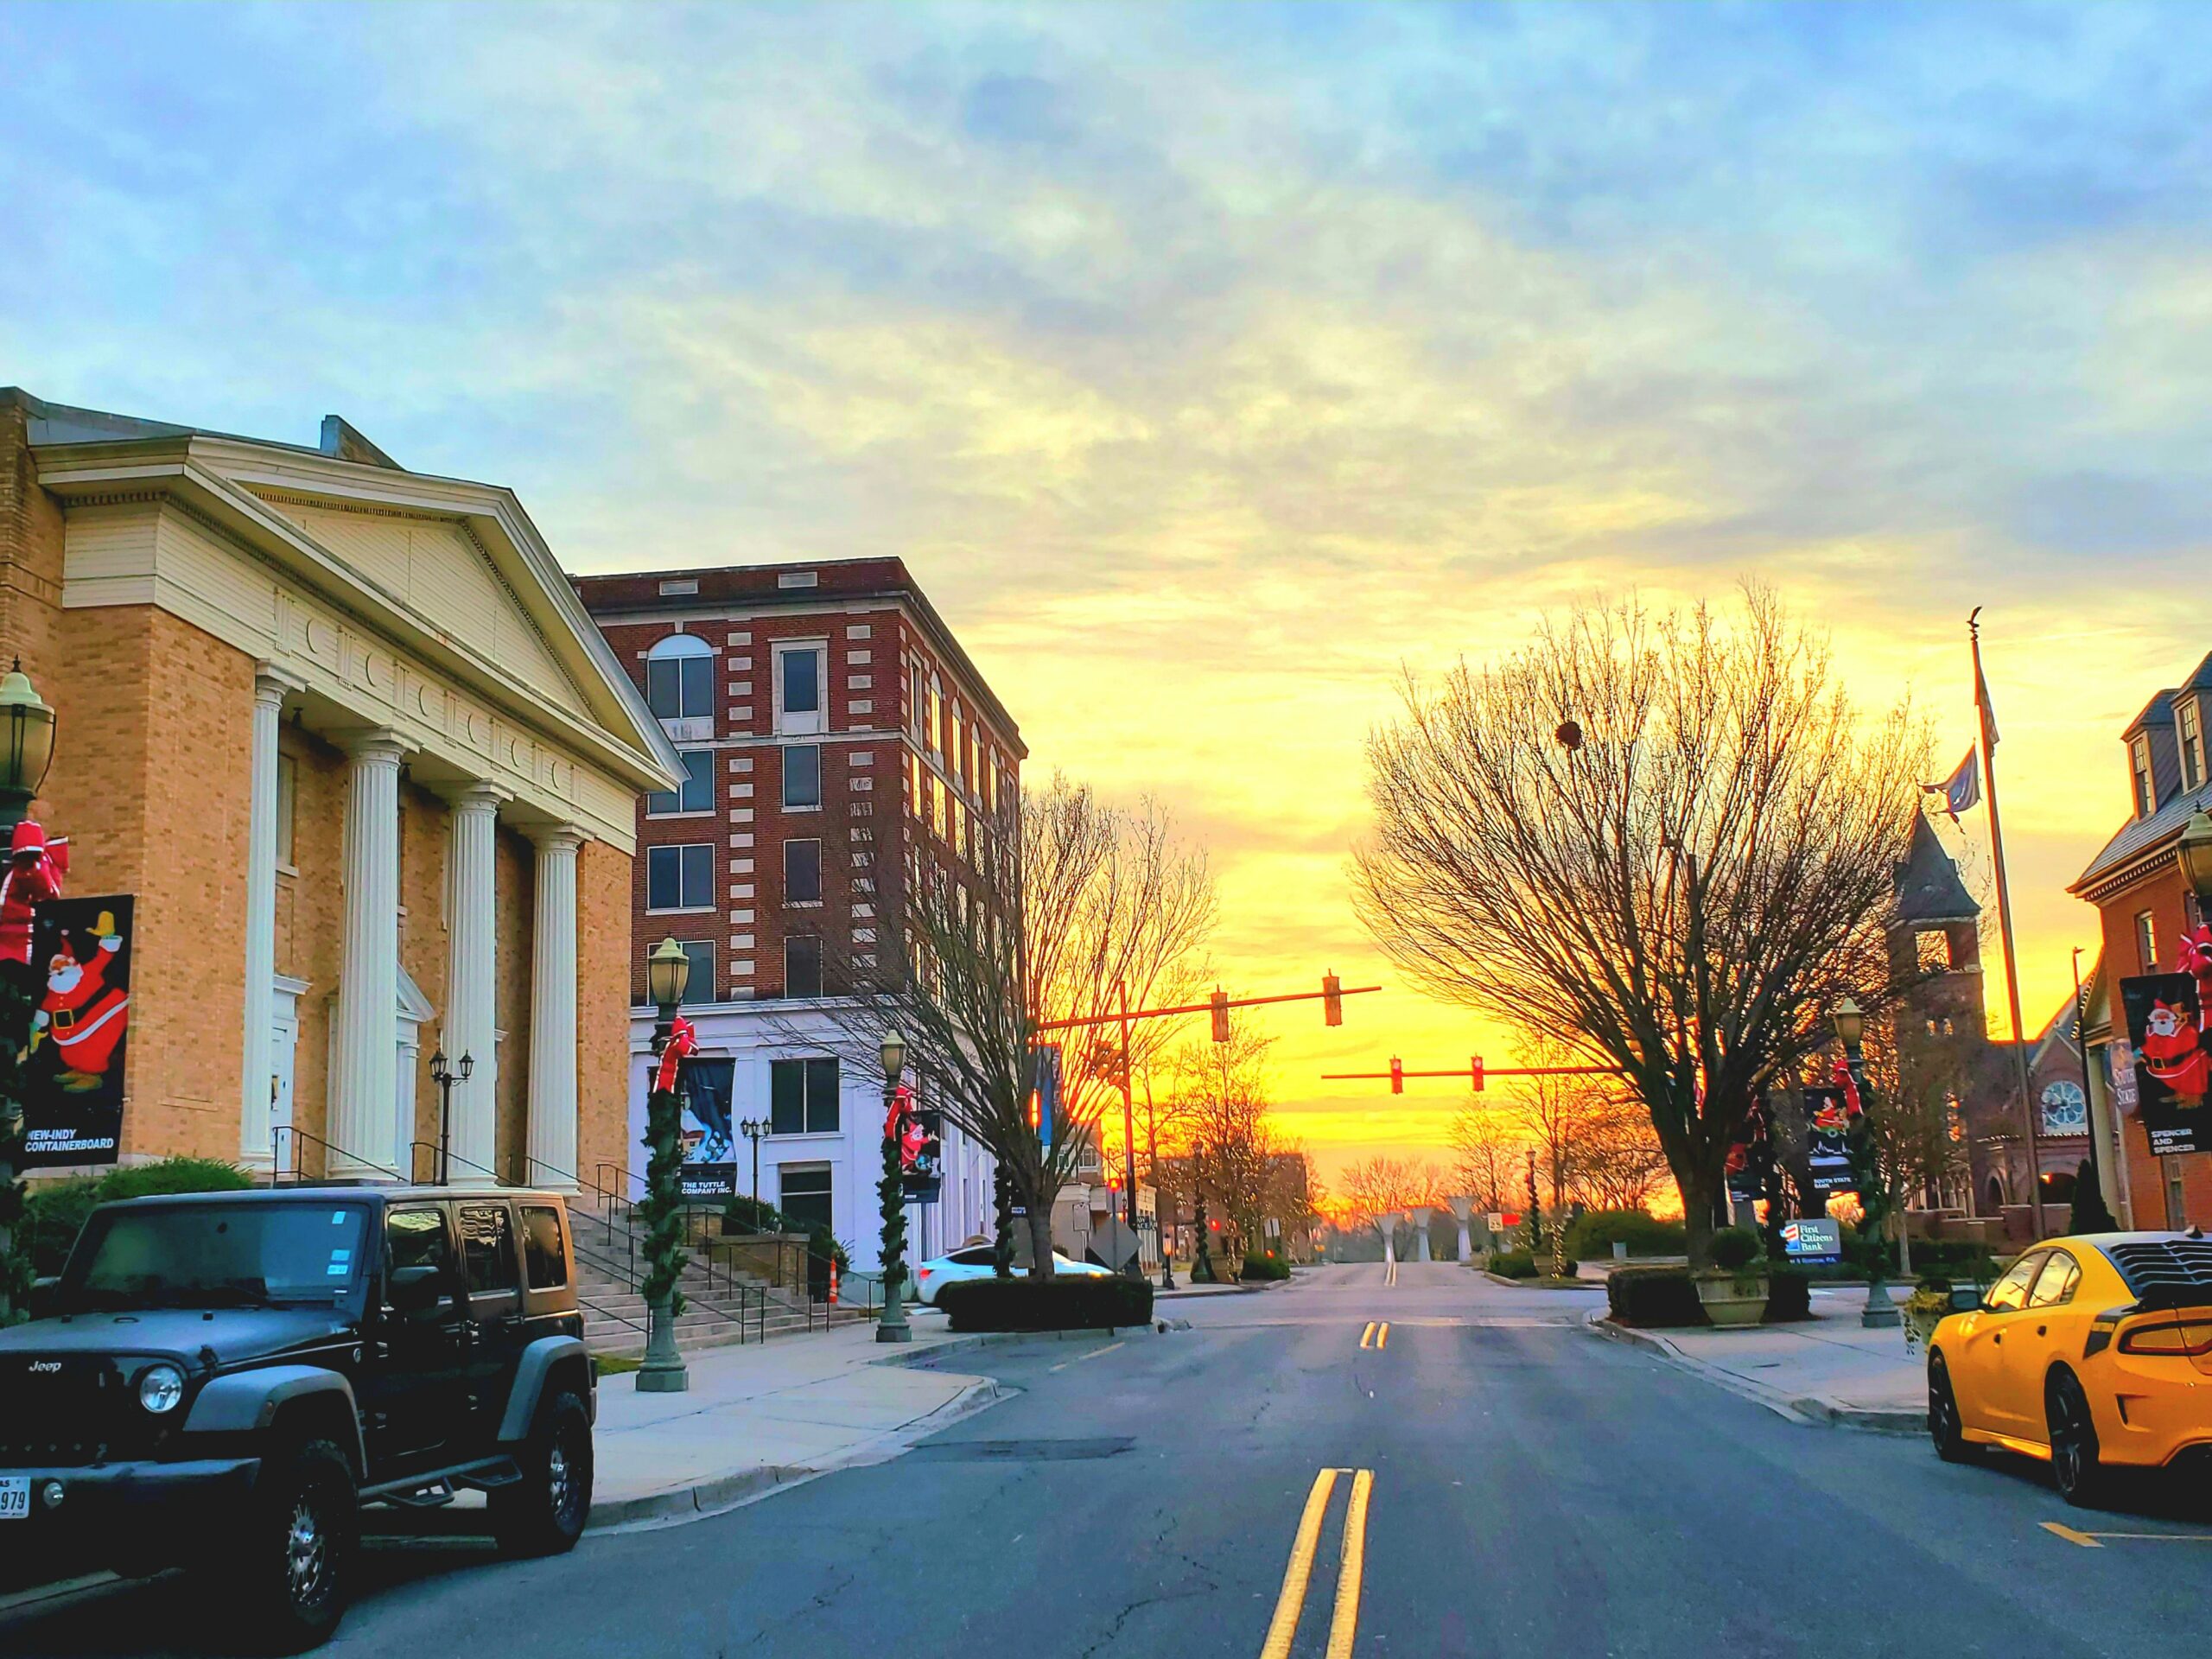 Rock Hill is a small city located 30 minutes from Charlotte, NC. It's one of the best places to live in South Carolina for those wanting a small town feel while close to big city amenities. Pictured: A view of Rock Hill, SC